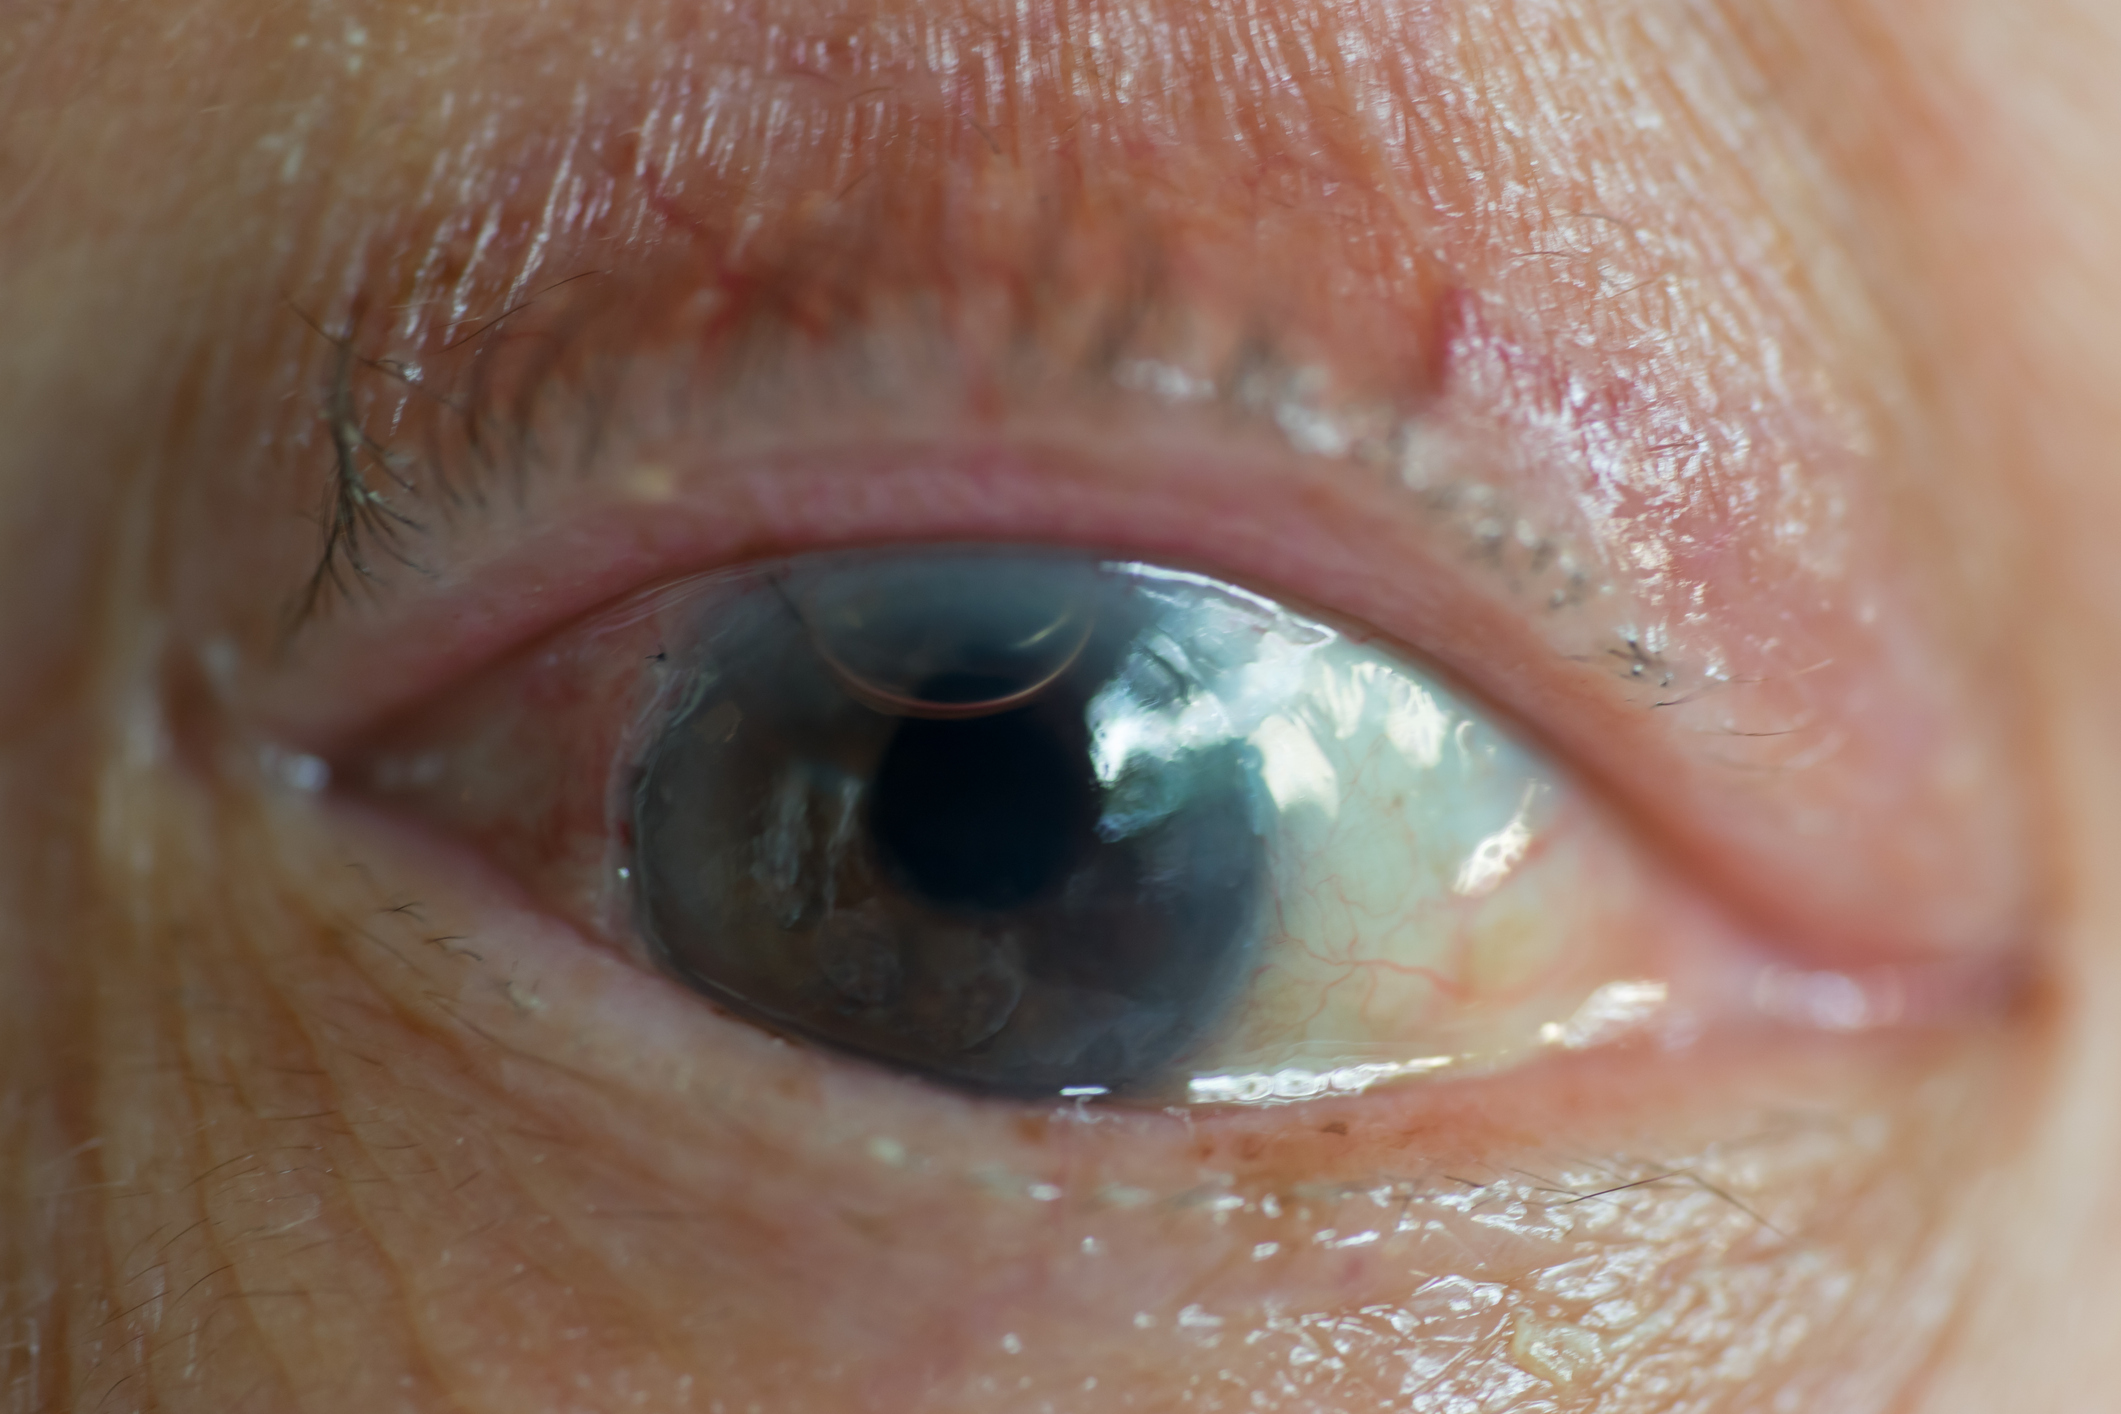 Toxocariasis: Ocular Symptoms and Treatment